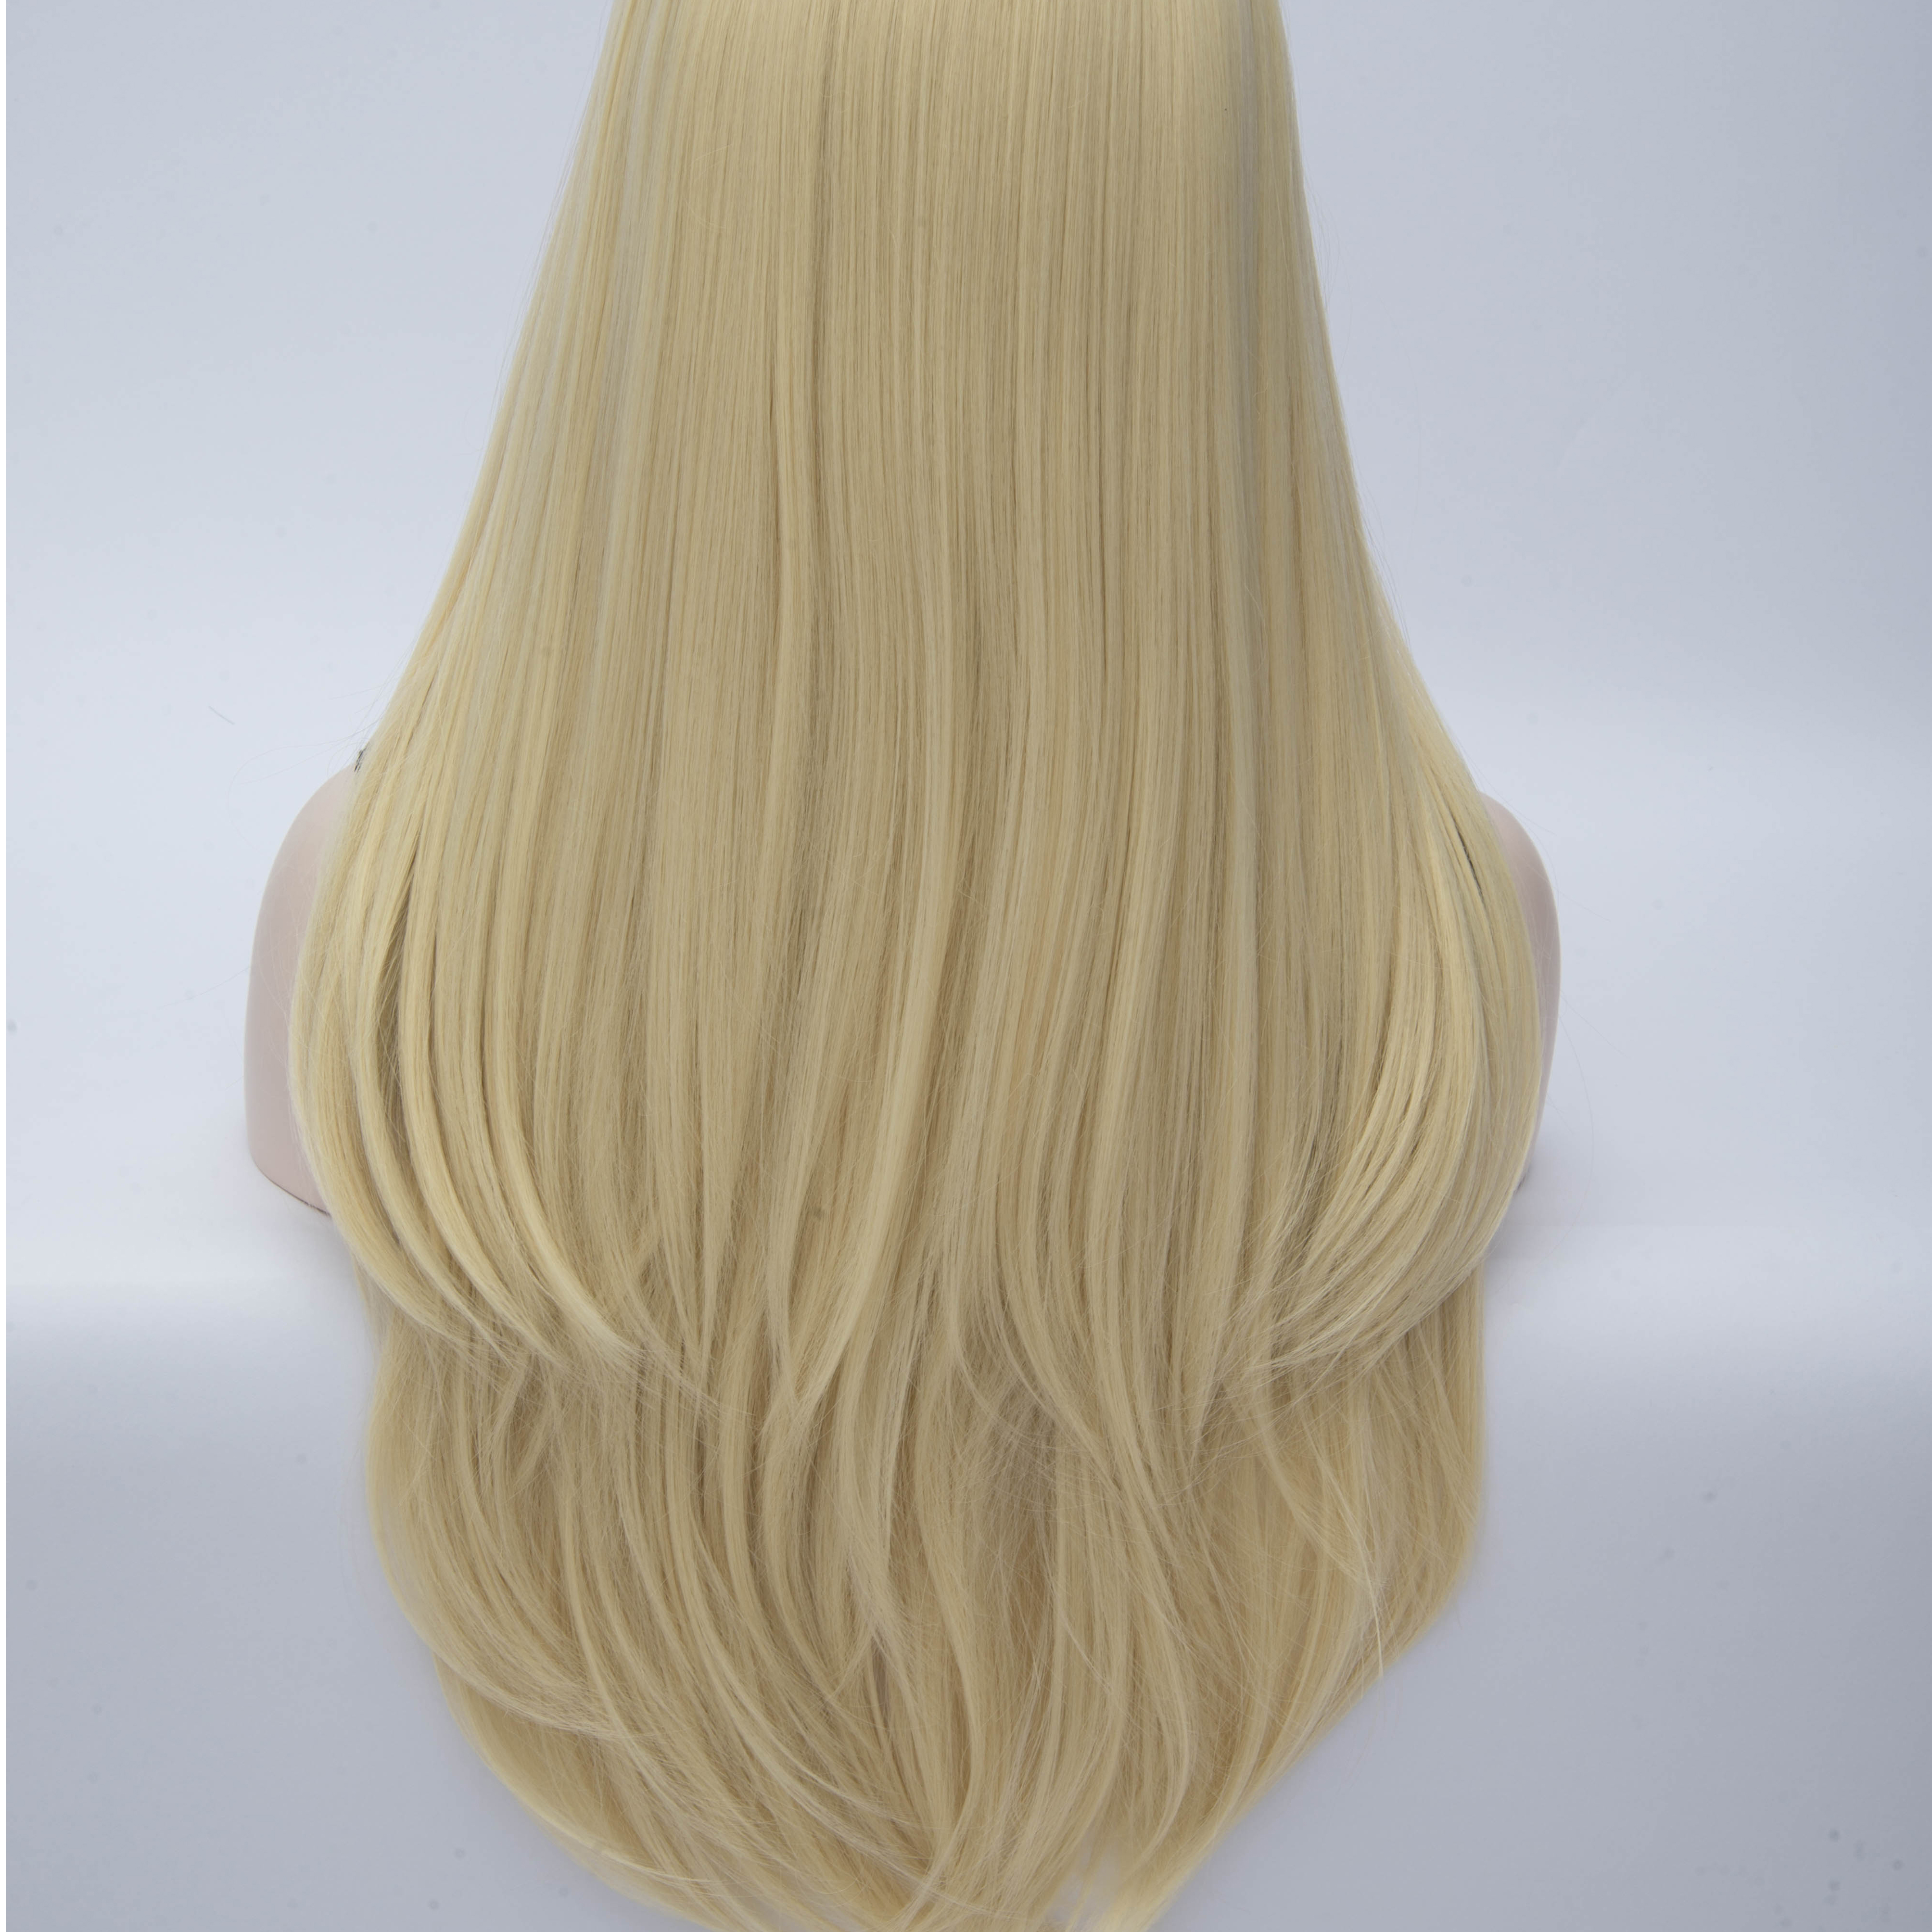 Light Blonde U-Style Long Straight Anime Hair Cosplay Party Wig 28 Inches